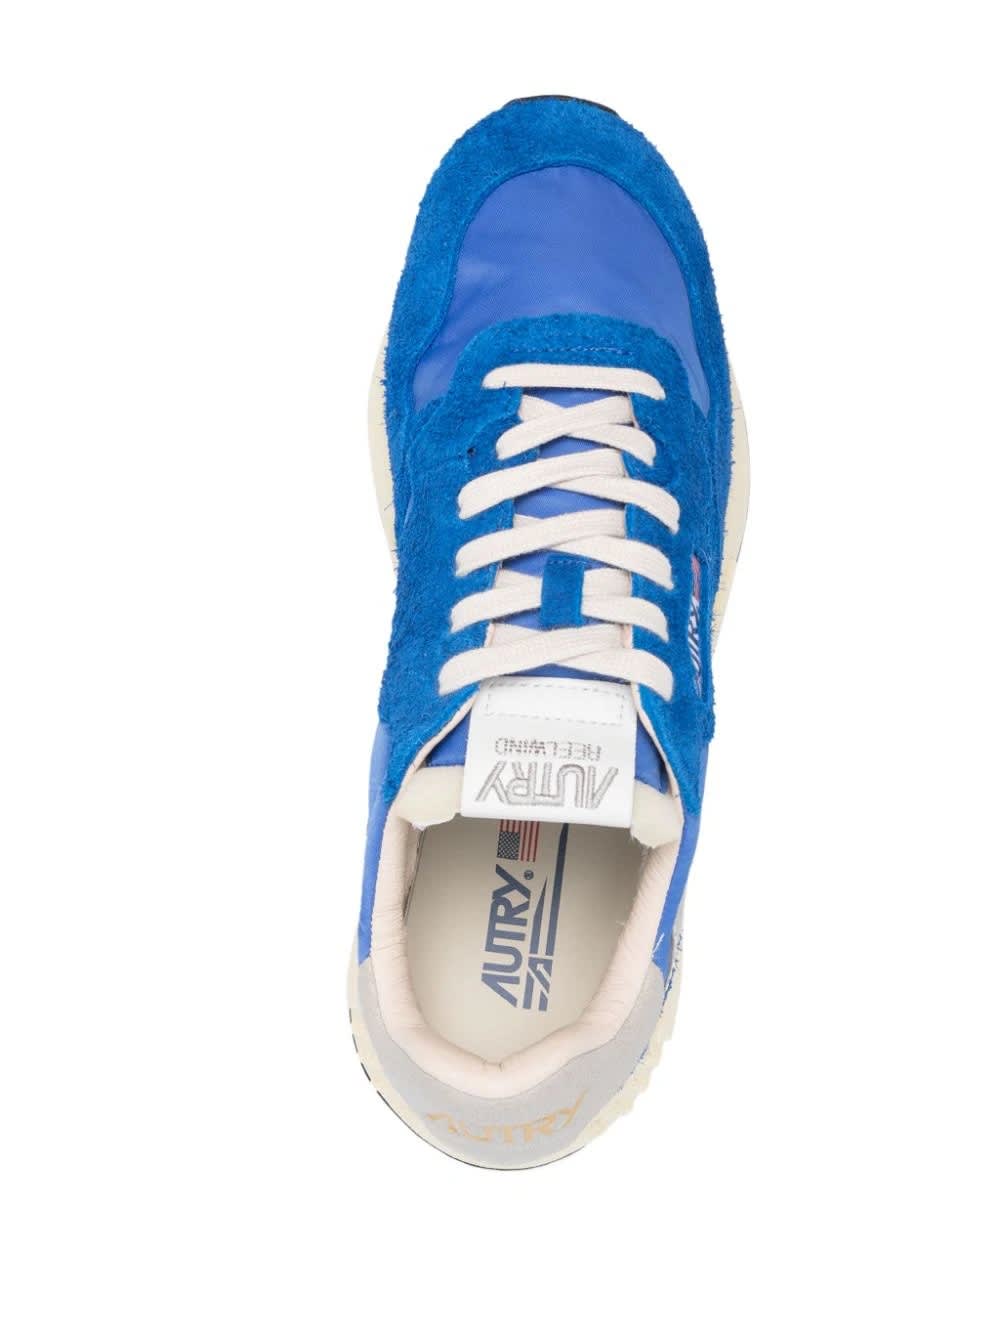 Shop Autry Reelwind Low Sneakers In Electric Blue Nylon And Suede